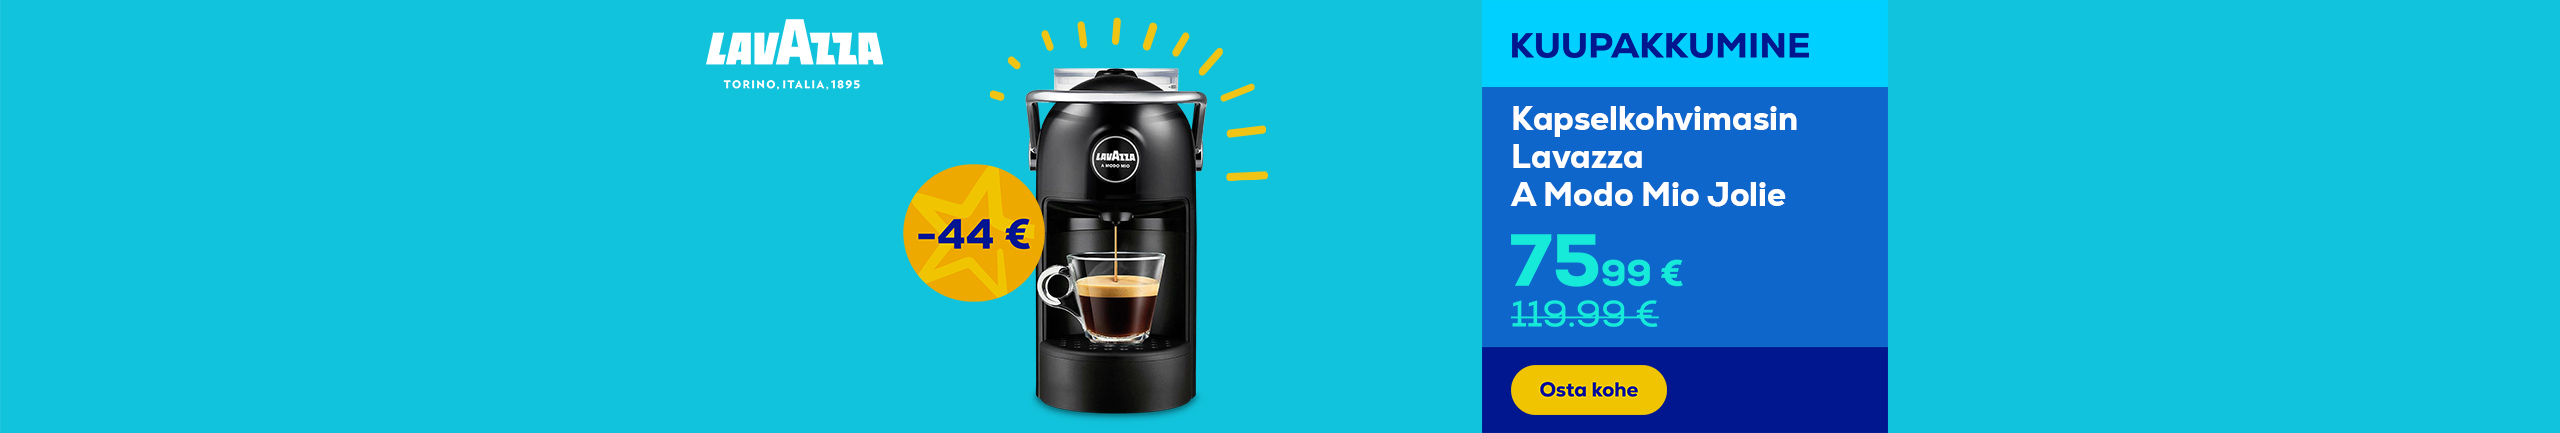 Lavazza capsule coffee machines with a good price!